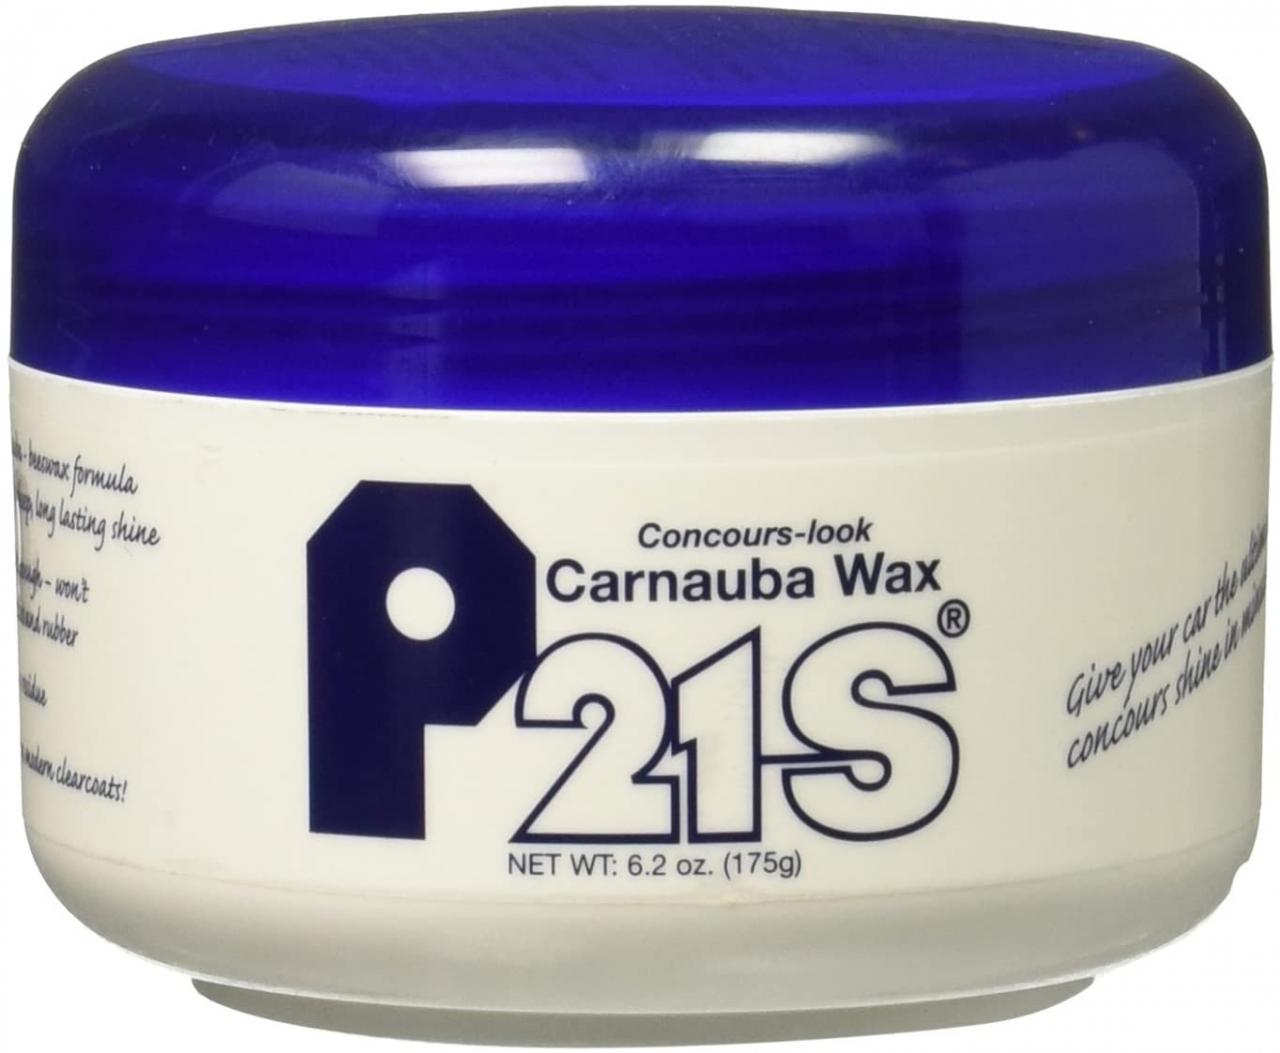 P21S Concours Look Carnauba Wax - P21S Auto Care Products